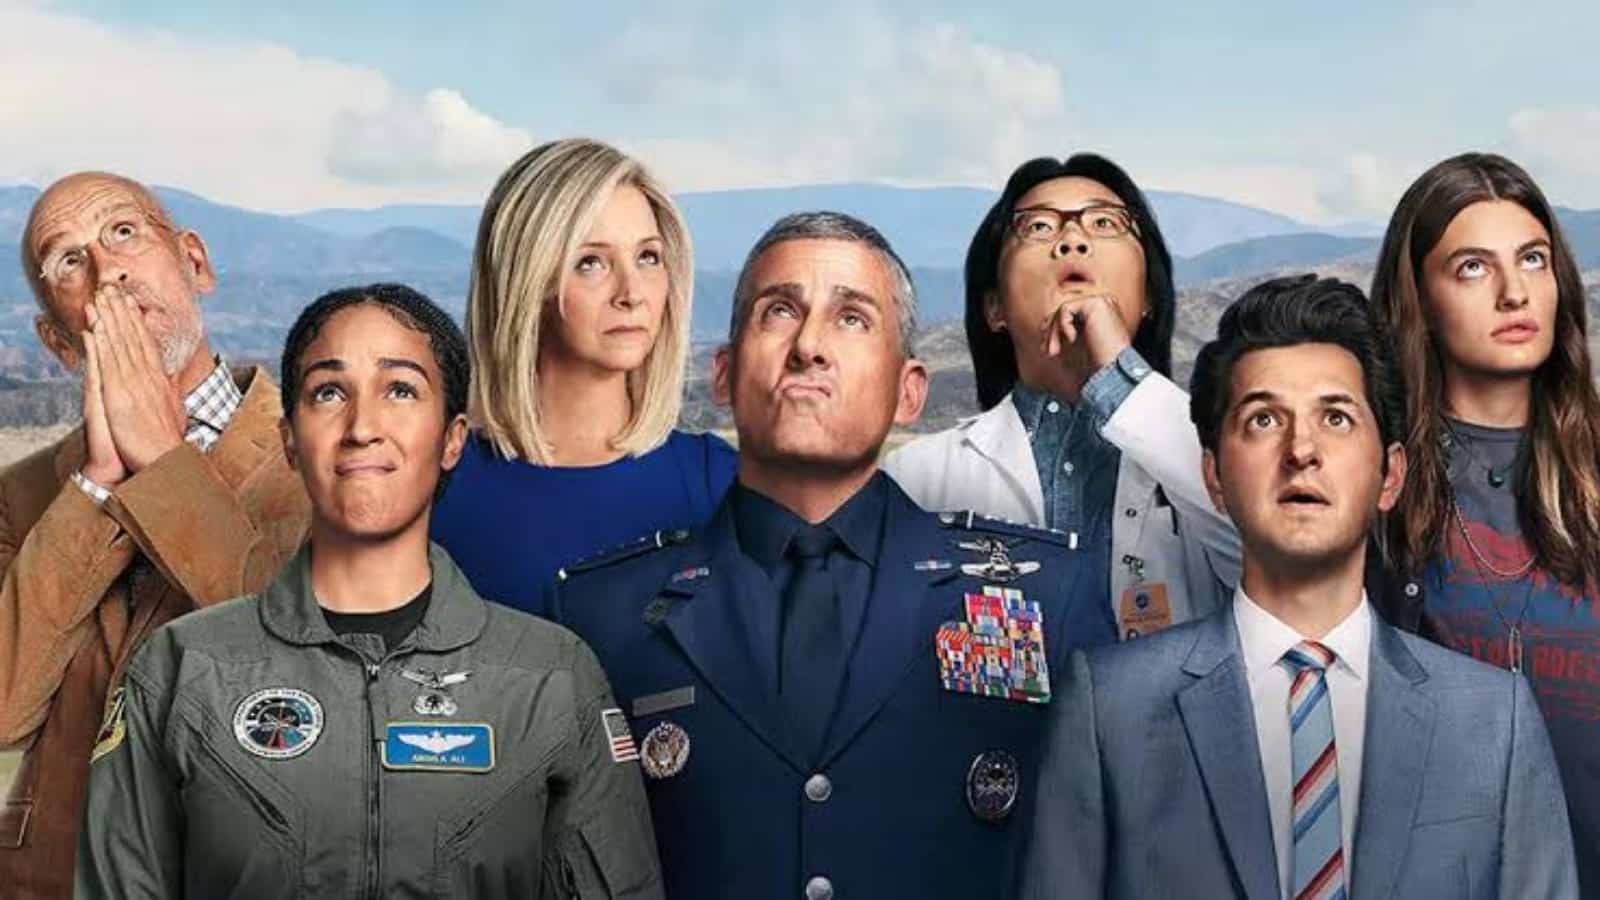 Poster of Space Force starring Steve Carell